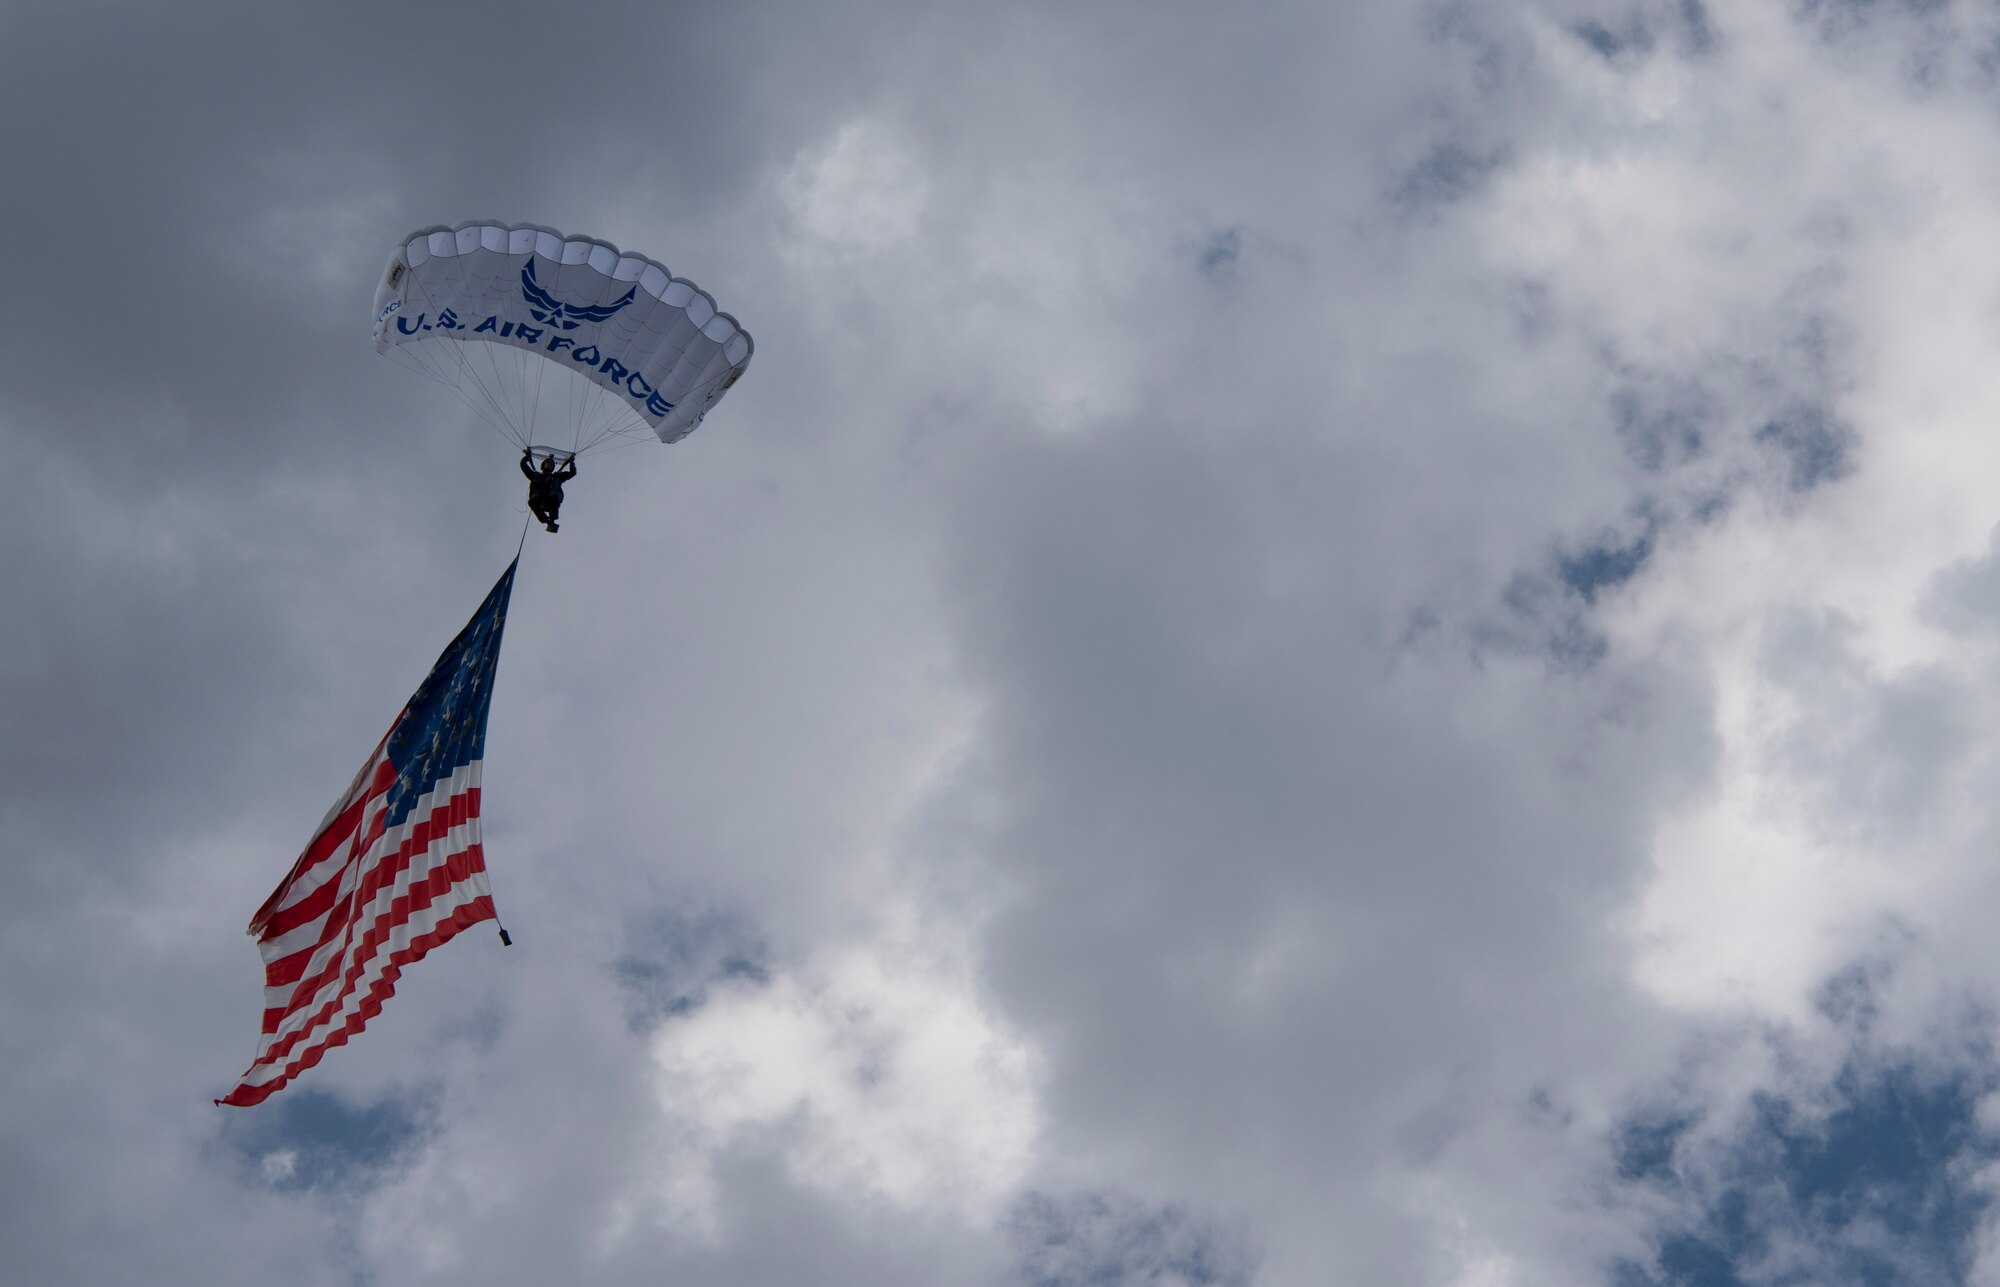 Lt. Col. Andrew Judkins, 70th Flying Training Squadron, parachutes with an American flag before a Rocky Mountain Vibes game in Colorado Springs, Colorado, June 27, 2019. The demonstration was part of Military Appreciation Night, where military personnel received free admission to the Vibes game. (U.S. Air Force photo by Airman 1st Class Jonathan Whitely)